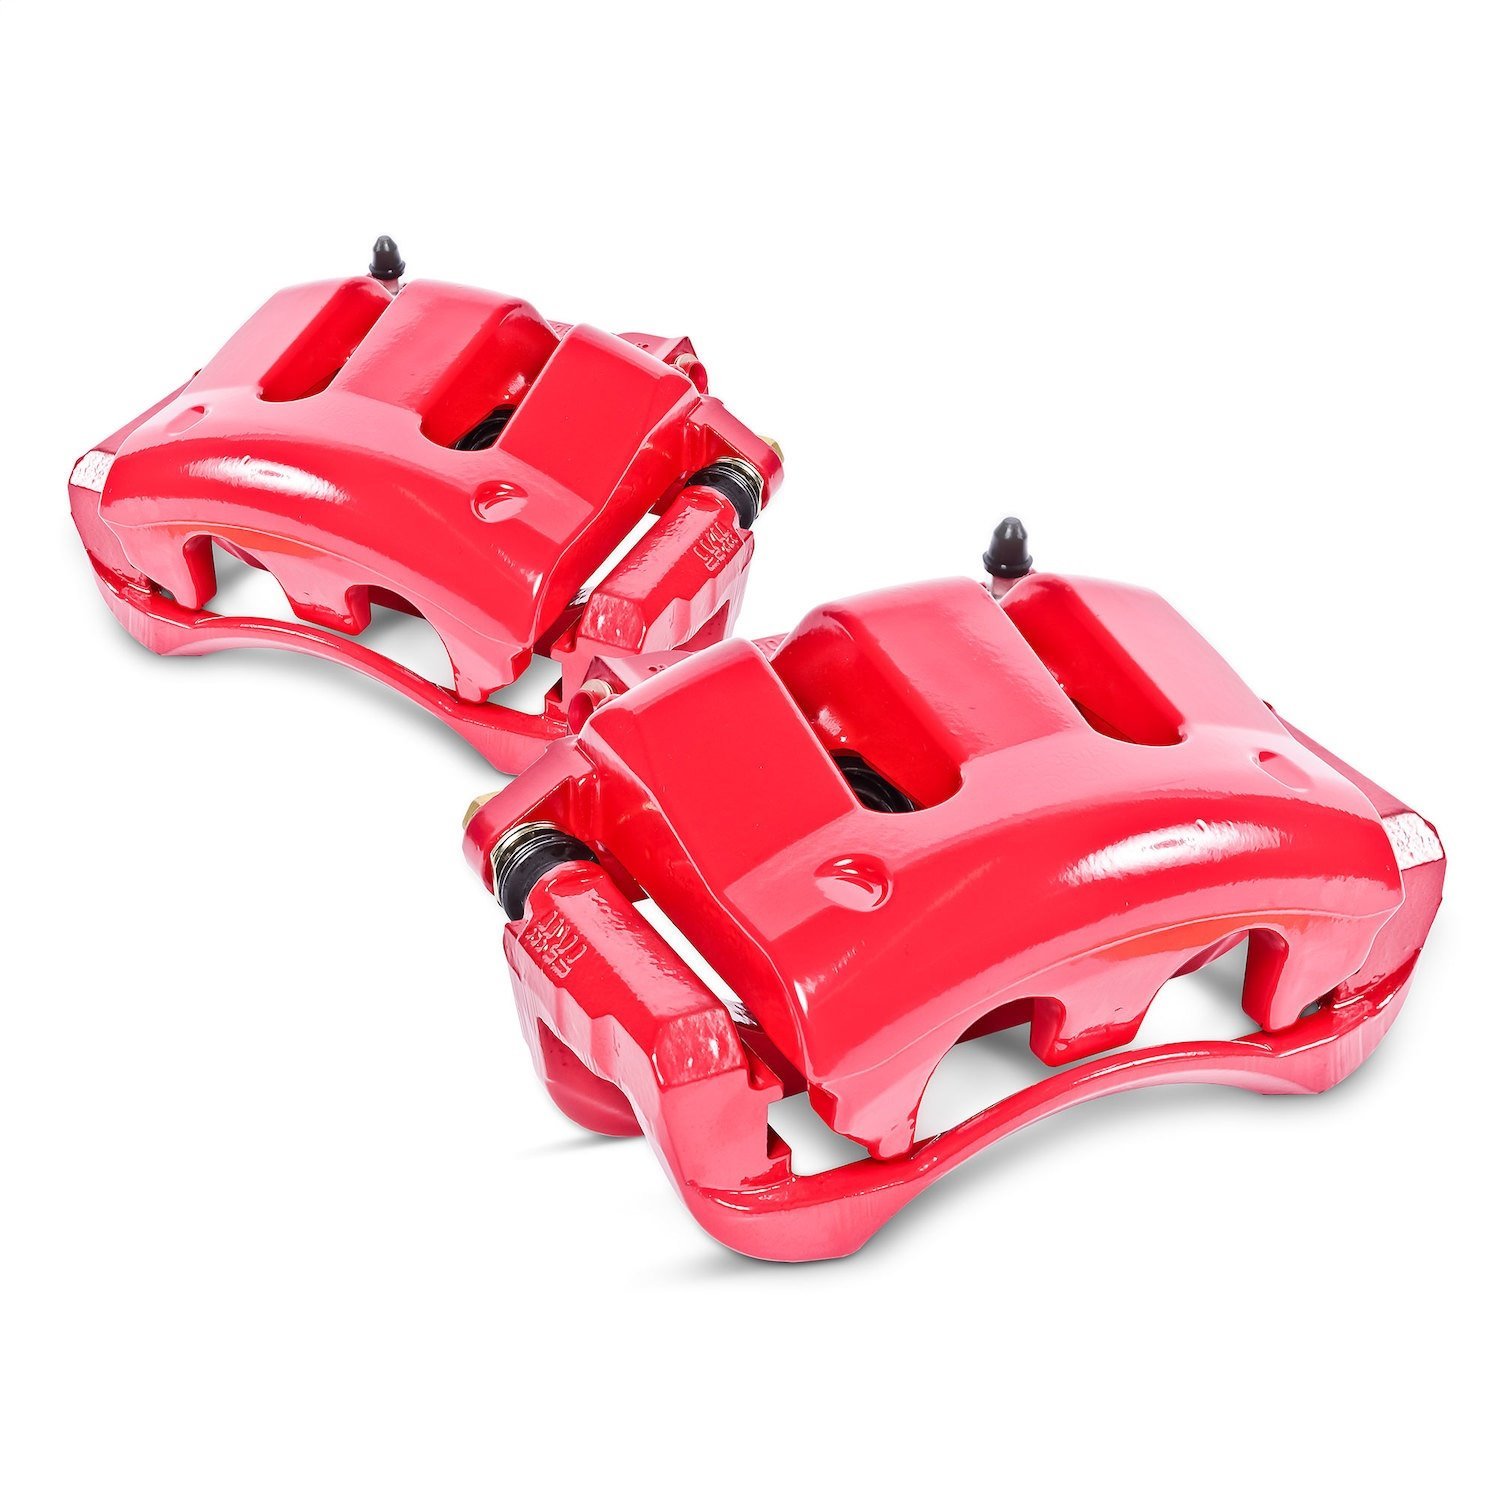 Performance Front Brake Calipers Powder Coated Red Pair